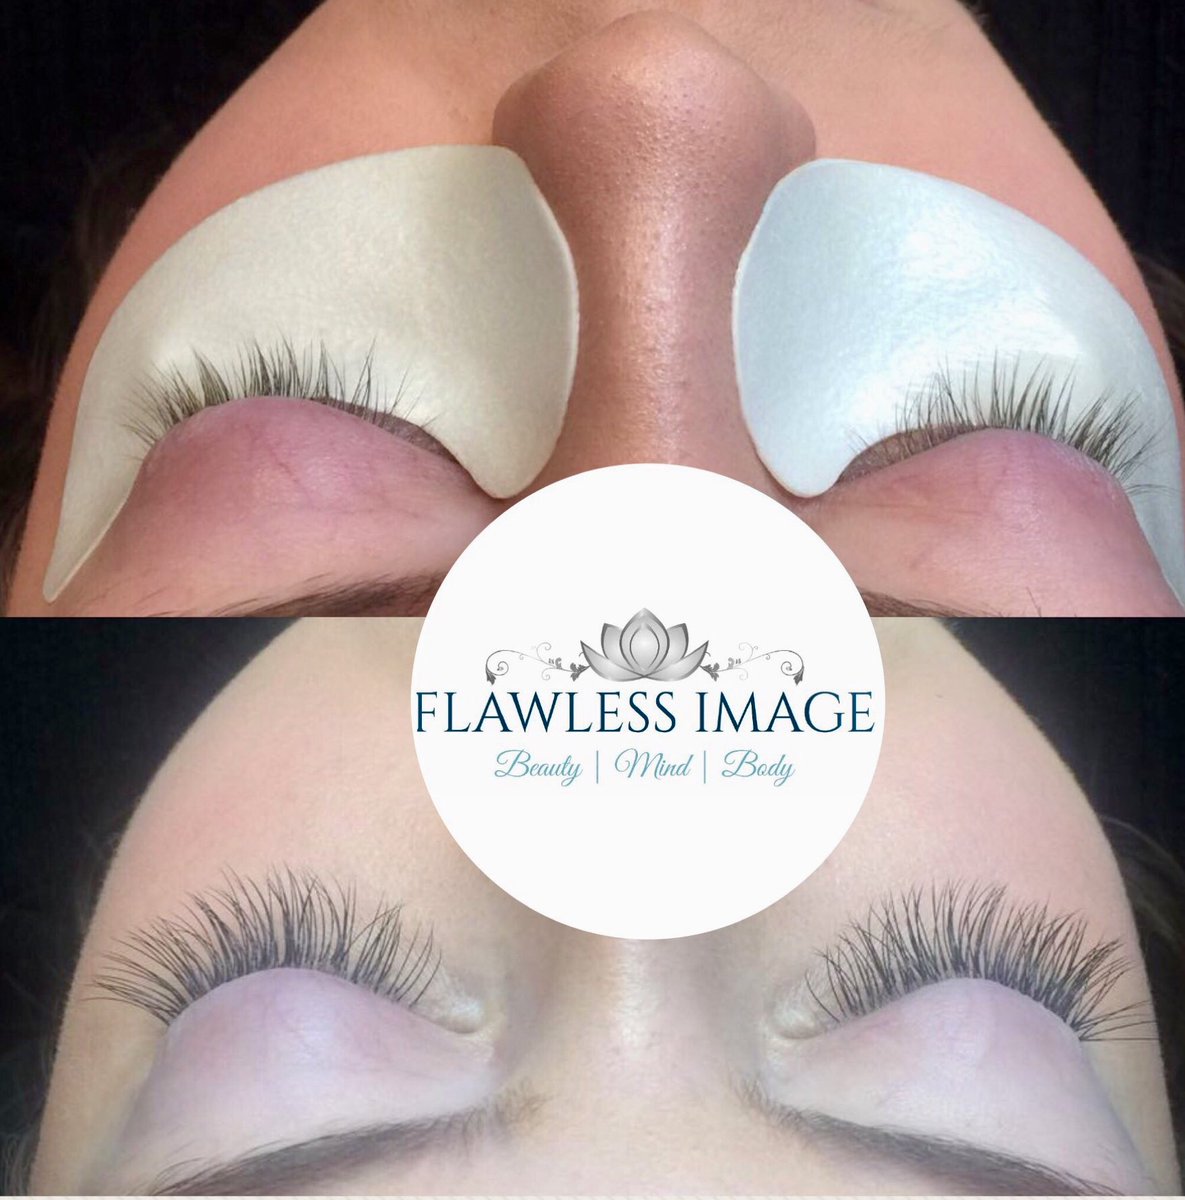 Another gorgeous set of nouveau lashes done by Cheryl #nouveaulashes #extensions #ipswichlashes #suffolklashes #flawlessimageipswich 😘 @Flawless_Image @NouveauLashesUK